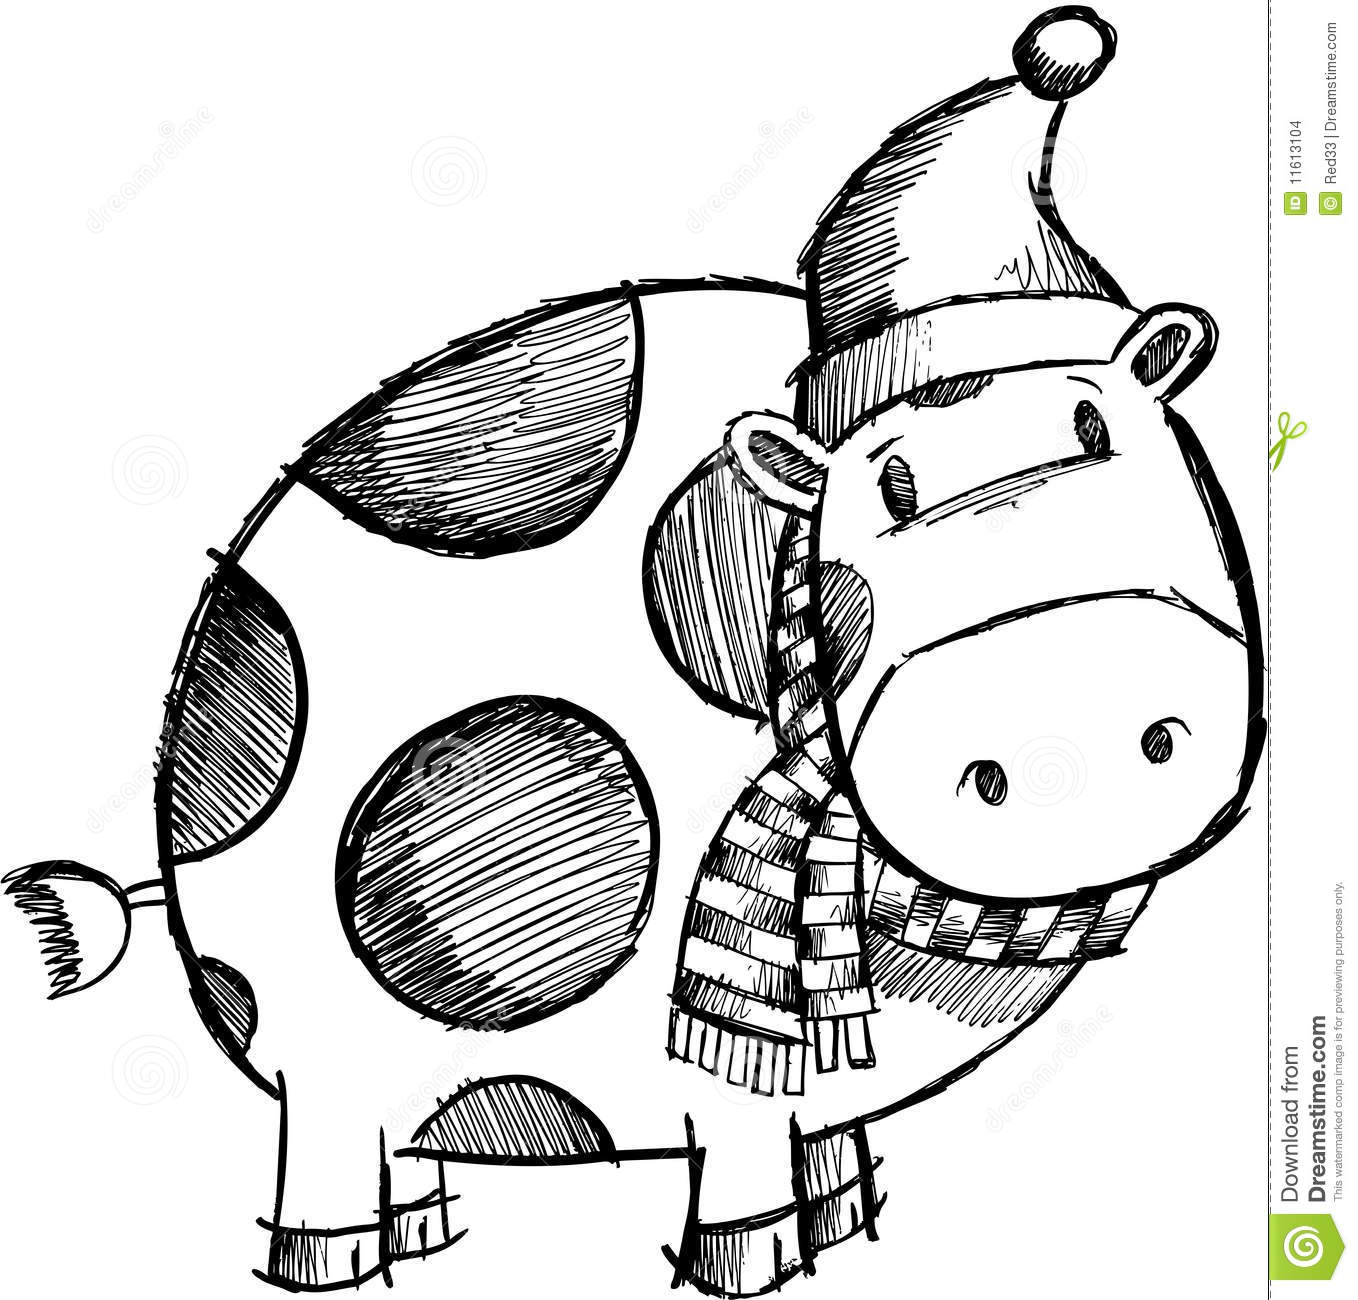 Doodle Sketchy Christmas Cow Stock Images   Image  11613104